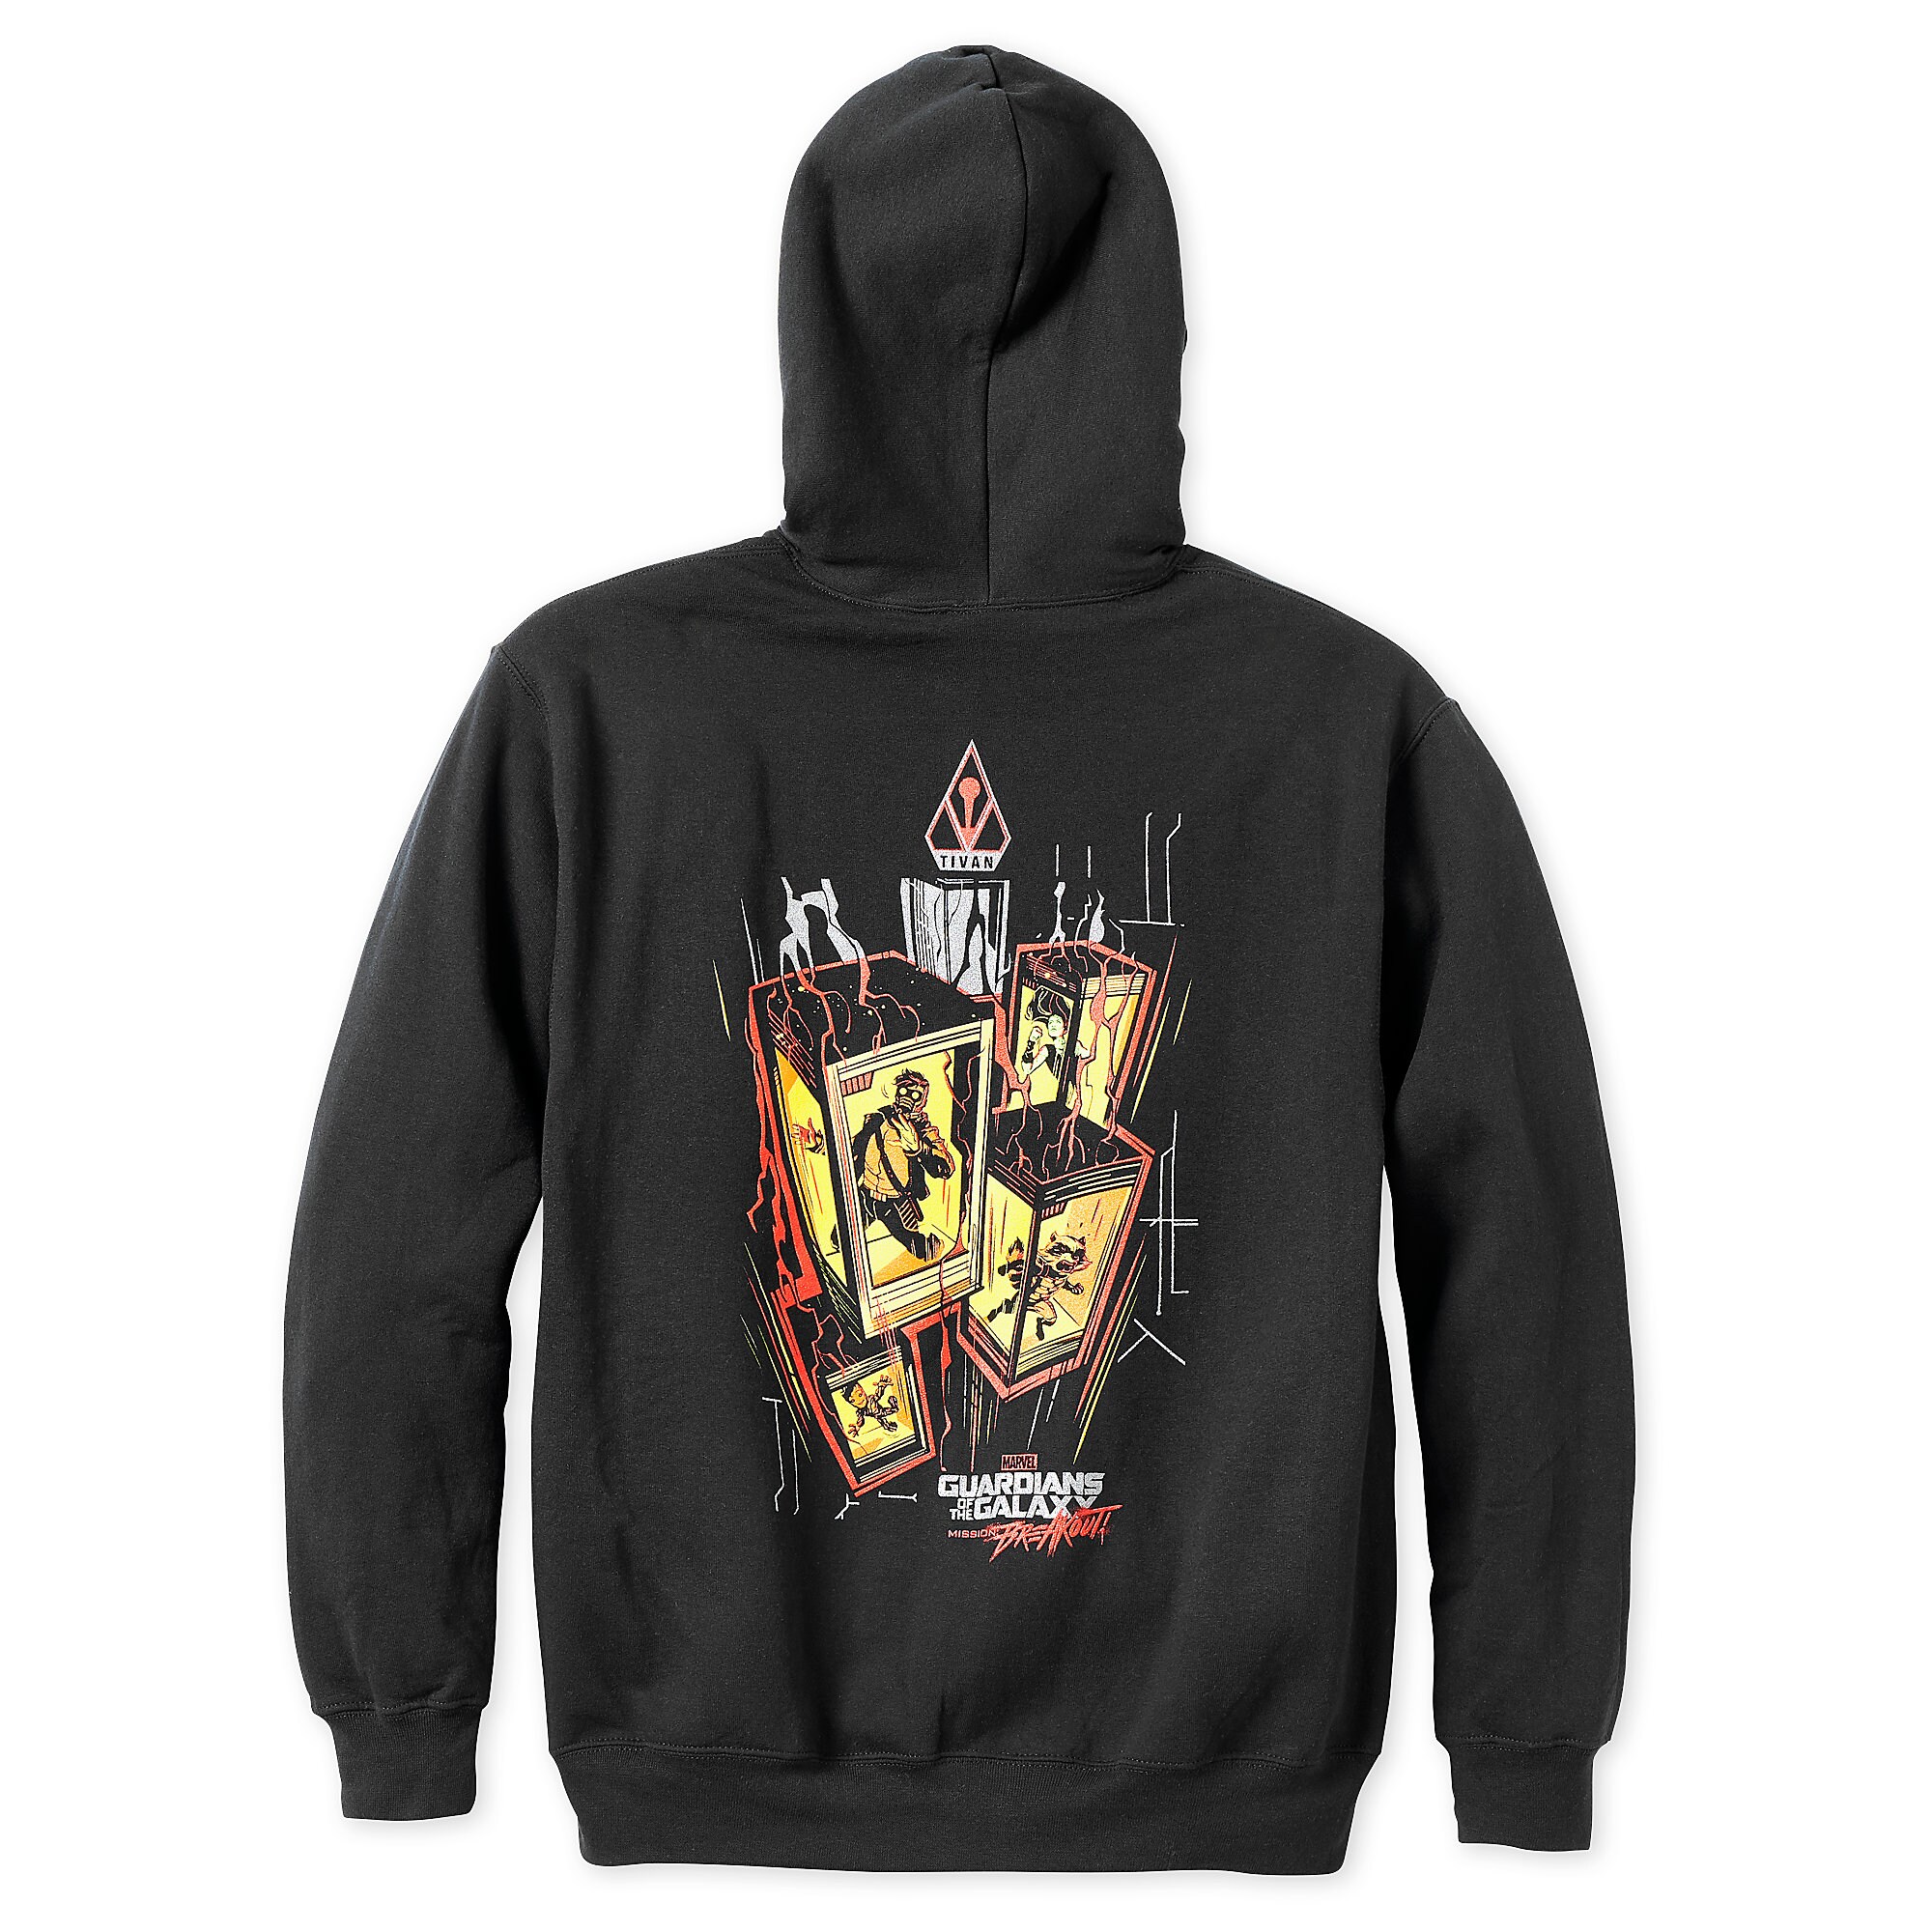 Guardians of the Galaxy Zip Hoodie for Men - Mission: Breakout!